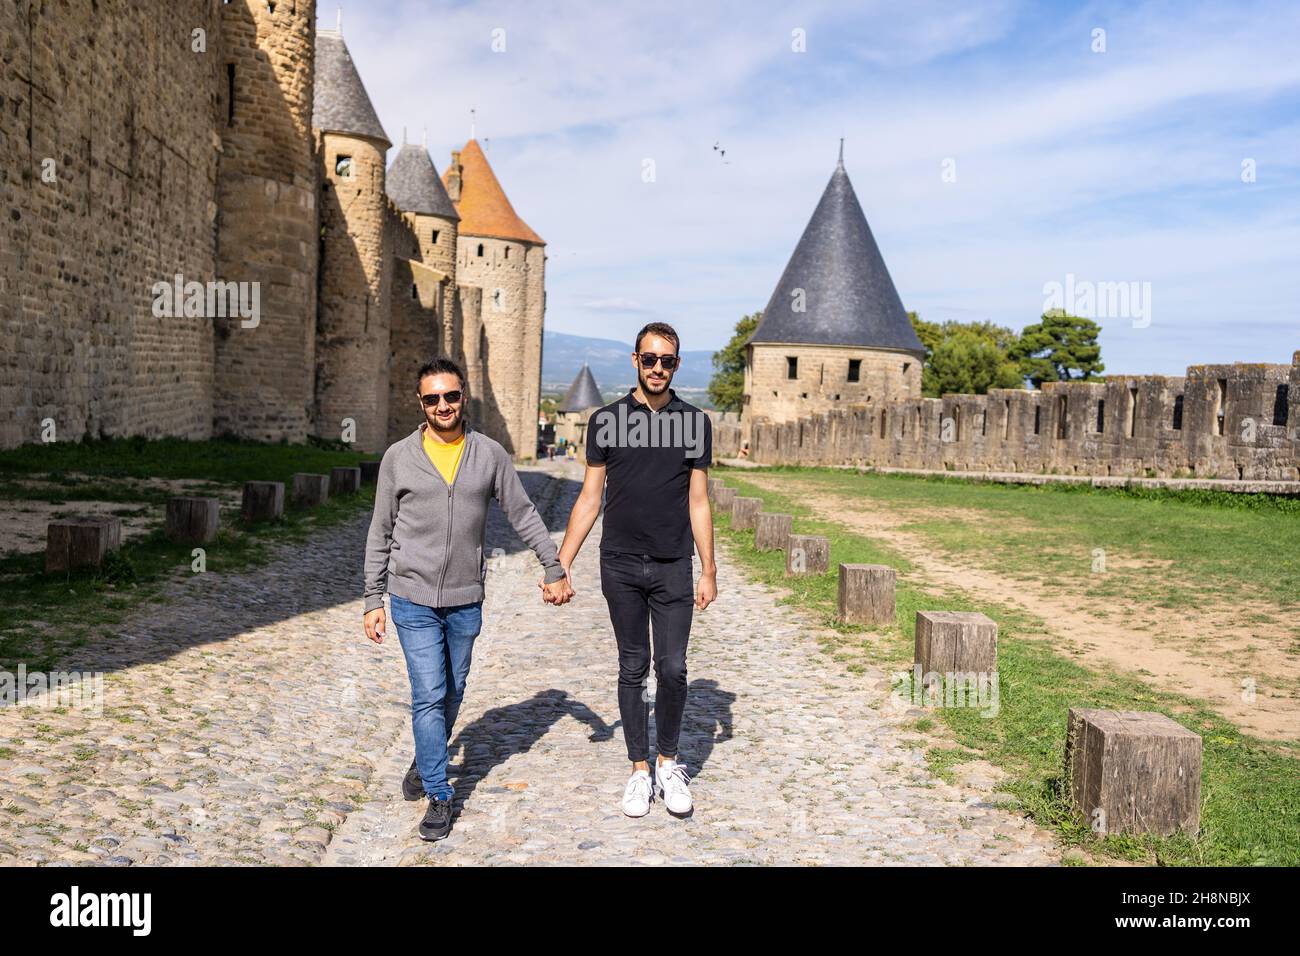 Gay couple walking holding hands next to the walls of a medieval castle. France Stock Photo